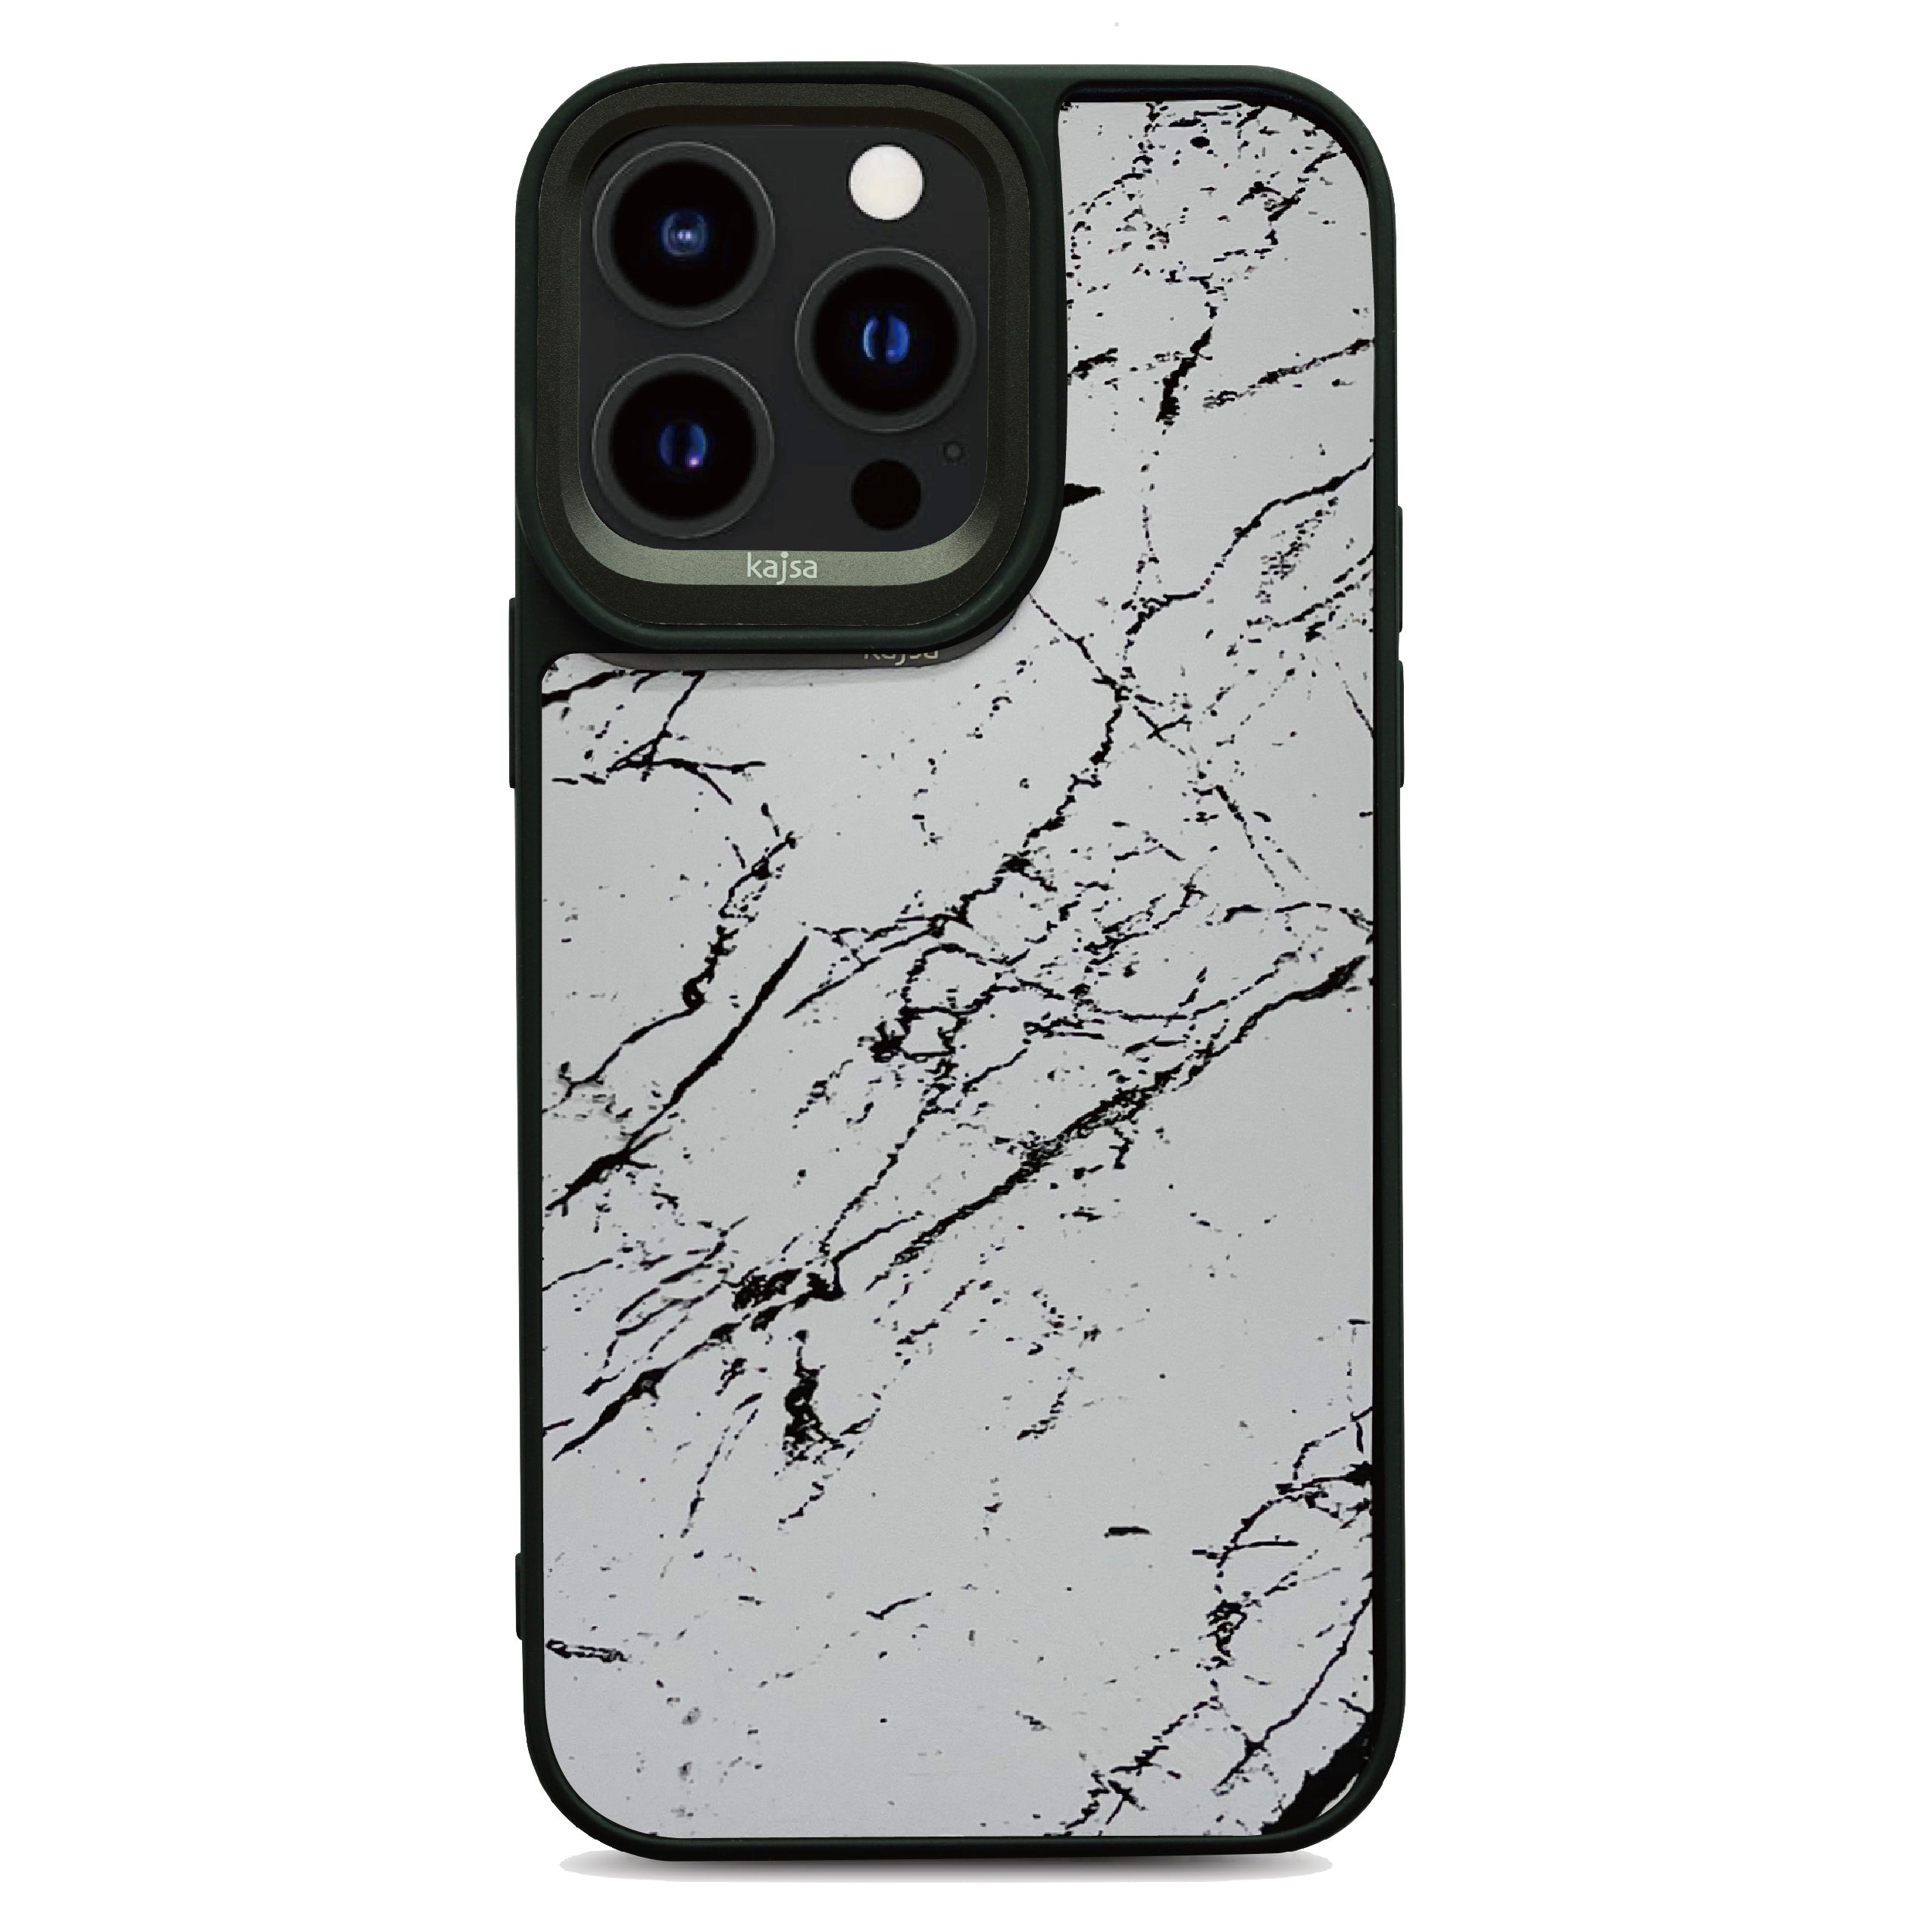 Preppie Collection - Marble PU Back Case for iPhone 14-Phone Case- phone case - phone cases- phone cover- iphone cover- iphone case- iphone cases- leather case- leather cases- DIYCASE - custom case - leather cover - hand strap case - croco pattern case - snake pattern case - carbon fiber phone case - phone case brand - unique phone case - high quality - phone case brand - protective case - buy phone case hong kong - online buy phone case - iphone‎手機殼 - 客製化手機殼 - samsung ‎手機殼 - 香港手機殼 - 買電話殼